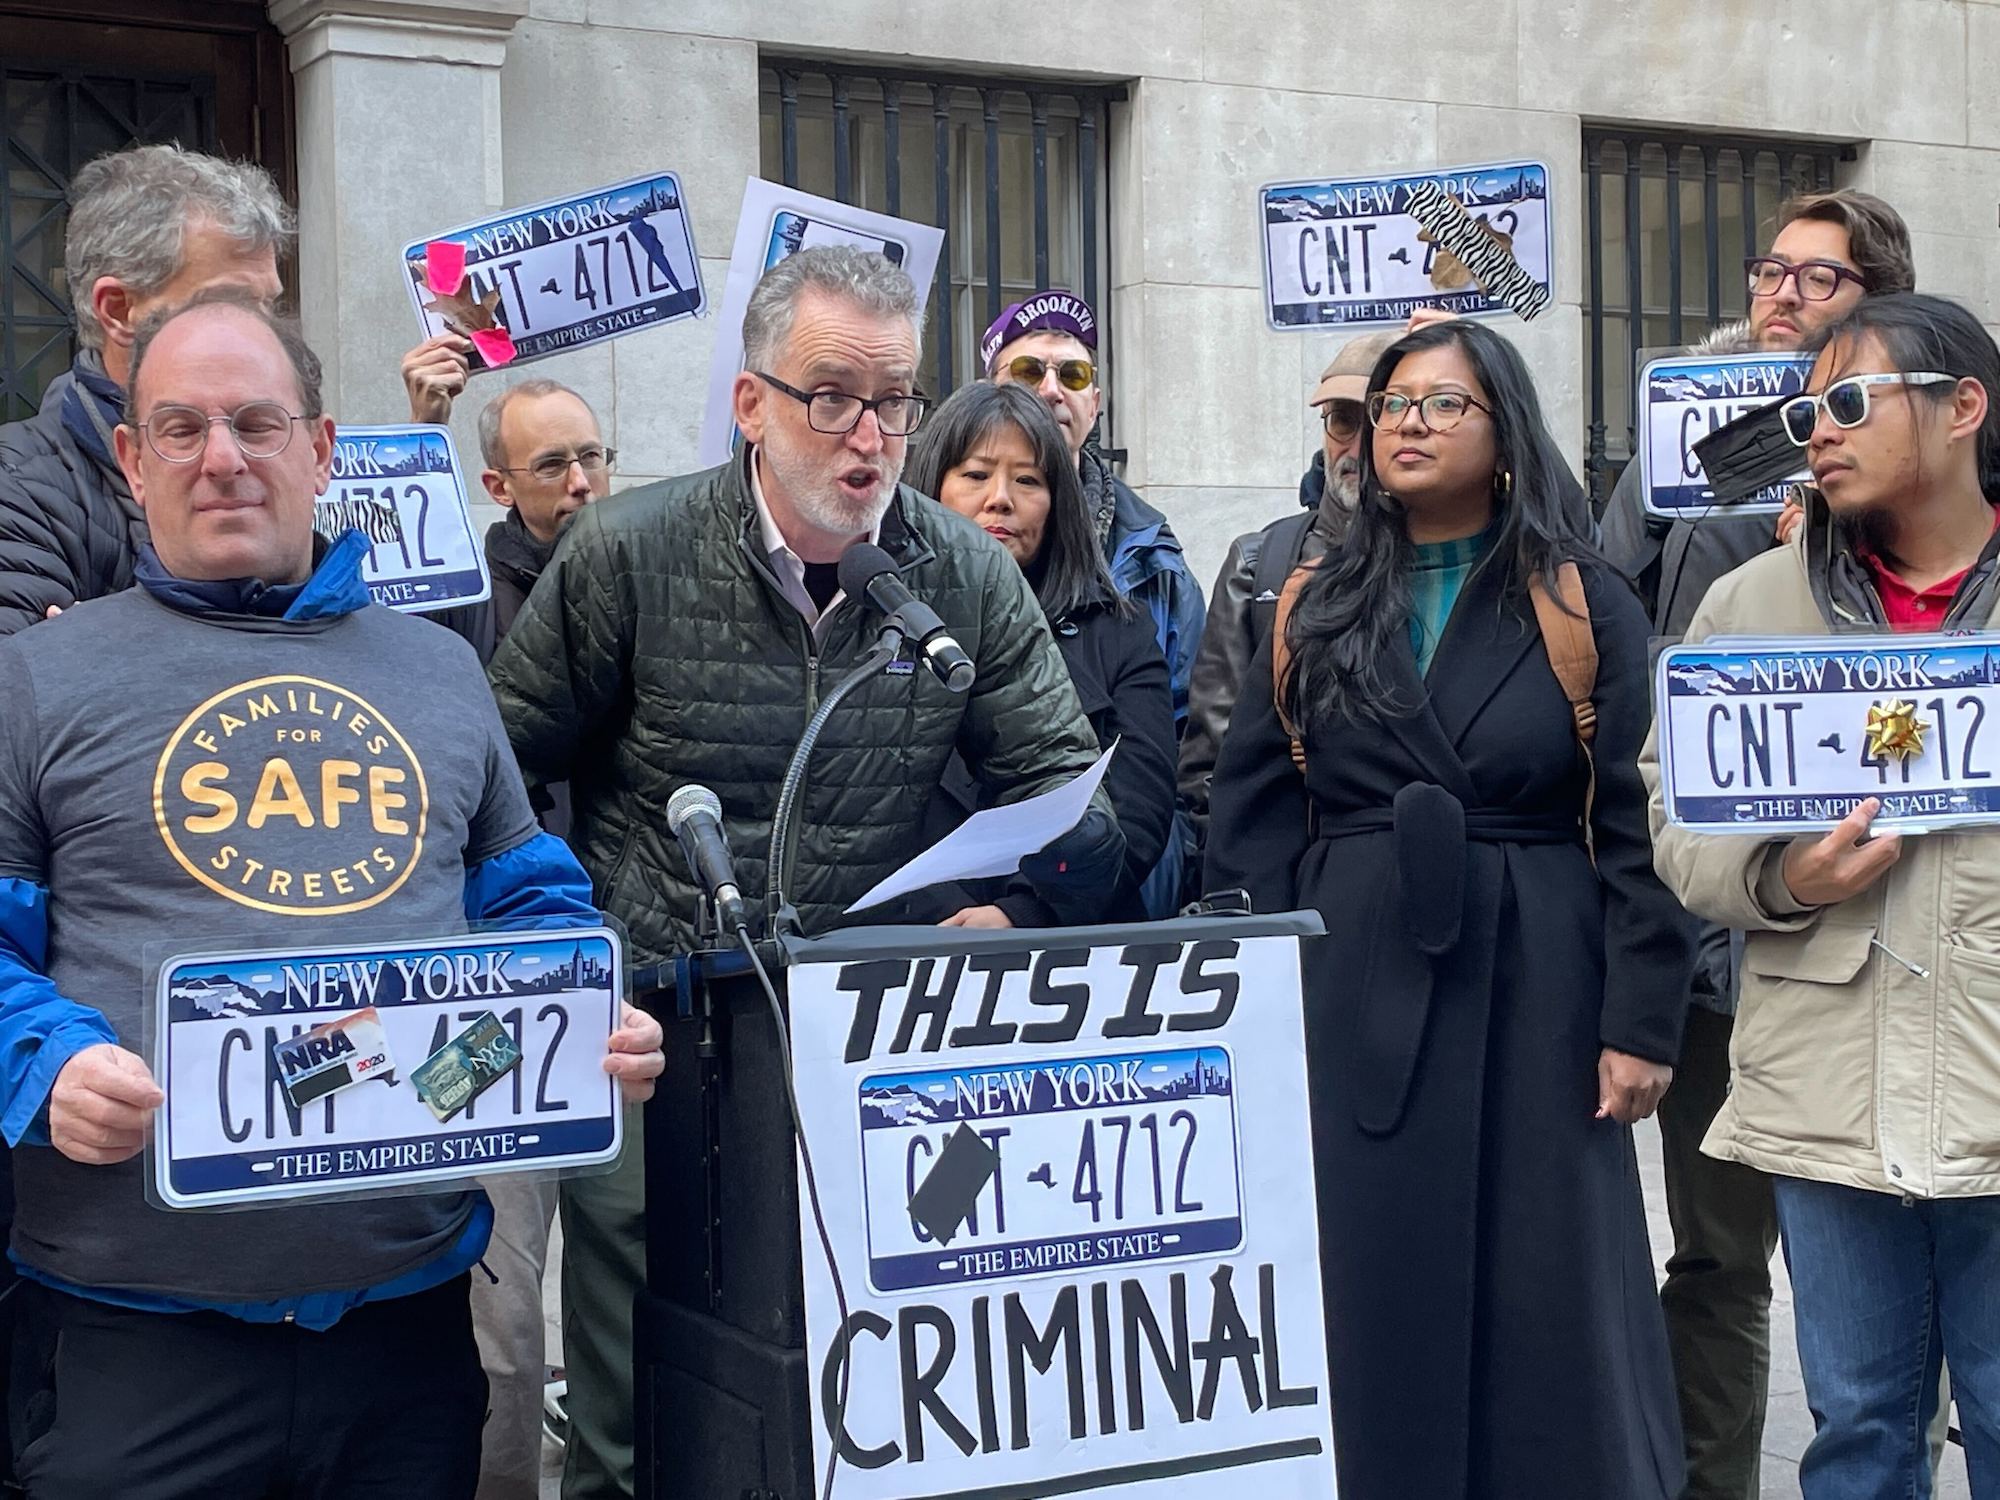 Attorney Adam White speaks into a microphone at a podium during a press conference surrounded by people holding signs of obscured license plates.